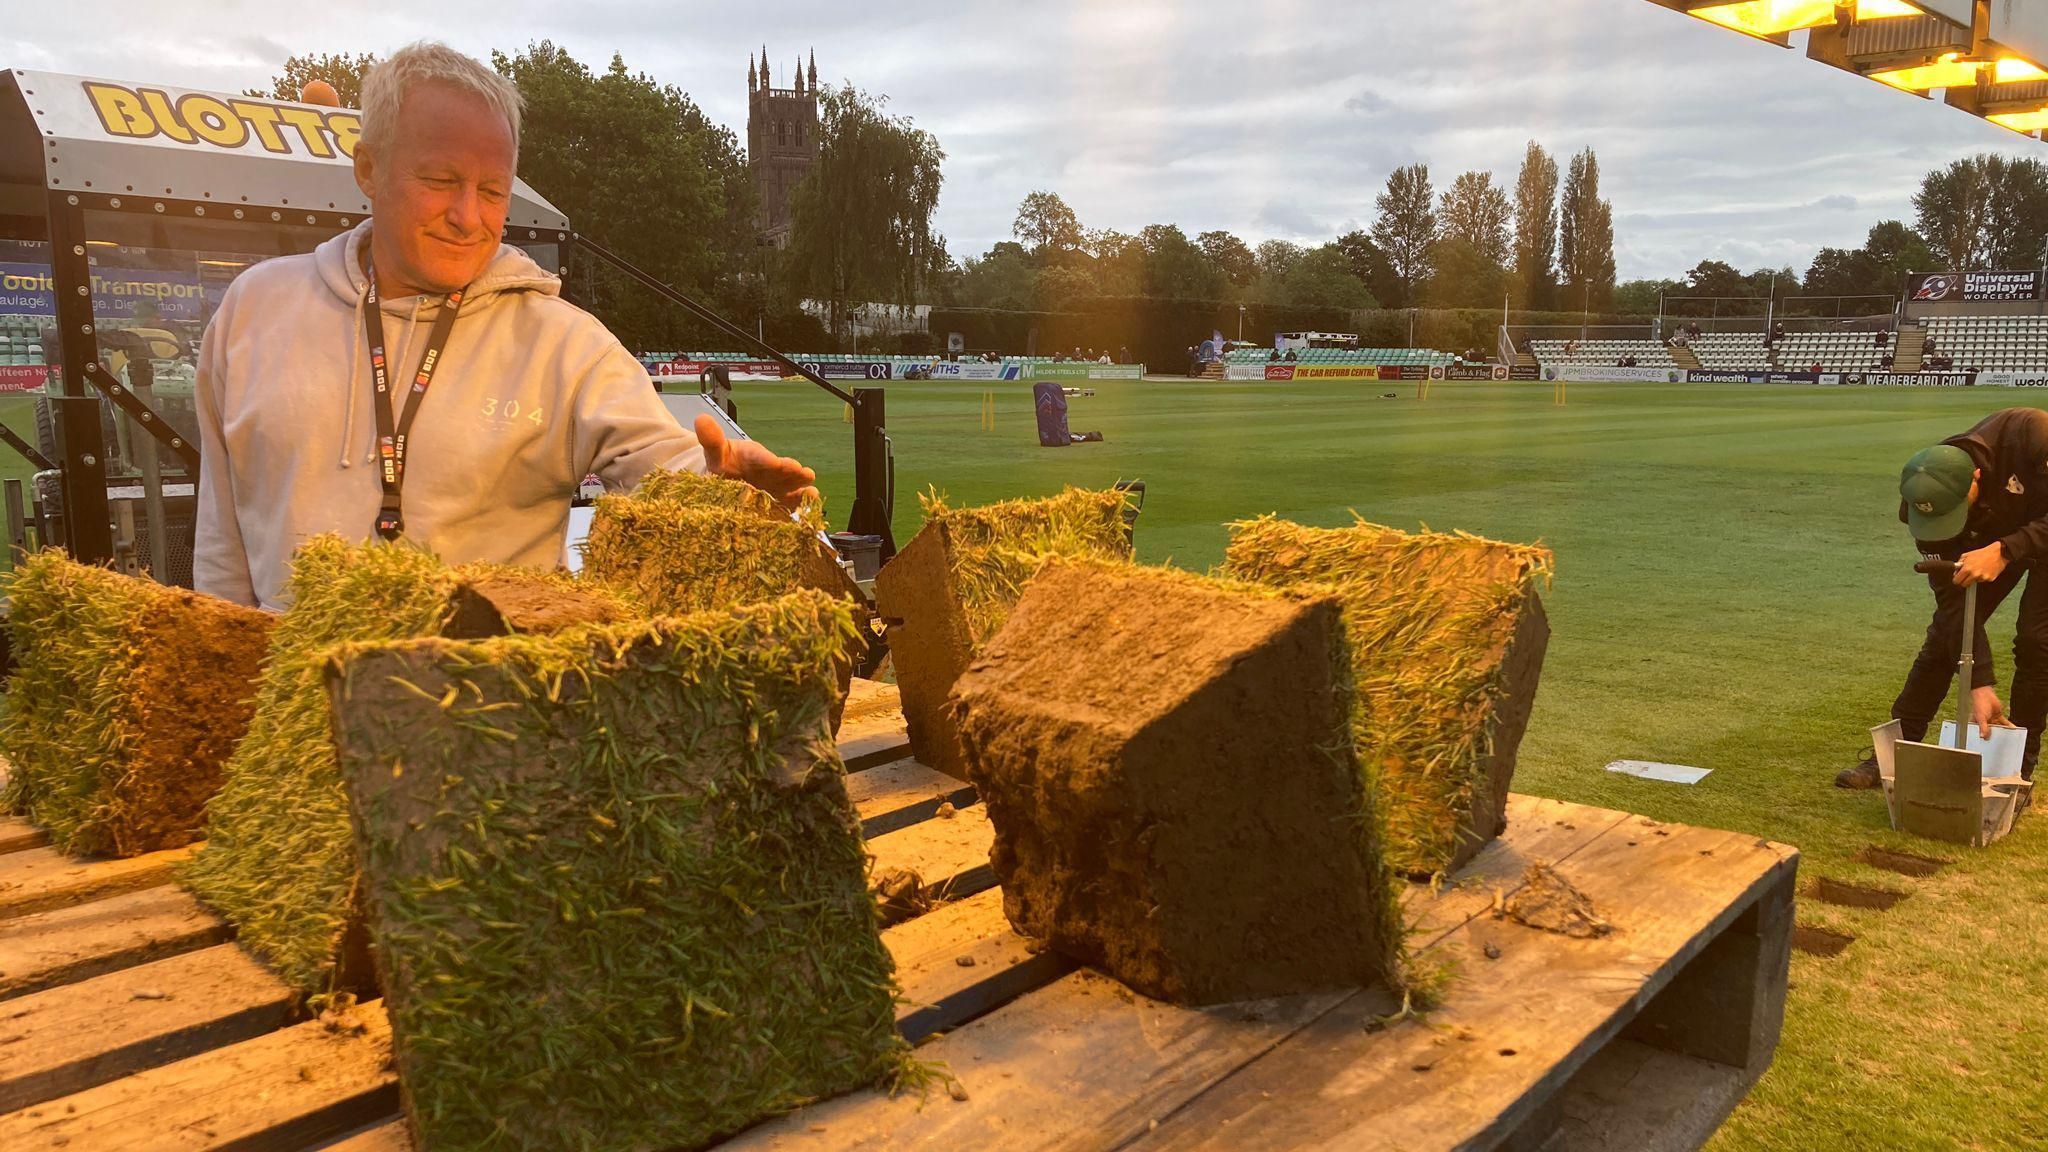 The Worcestershire groundstaff dug up sections of turf in an attempt to dry them out